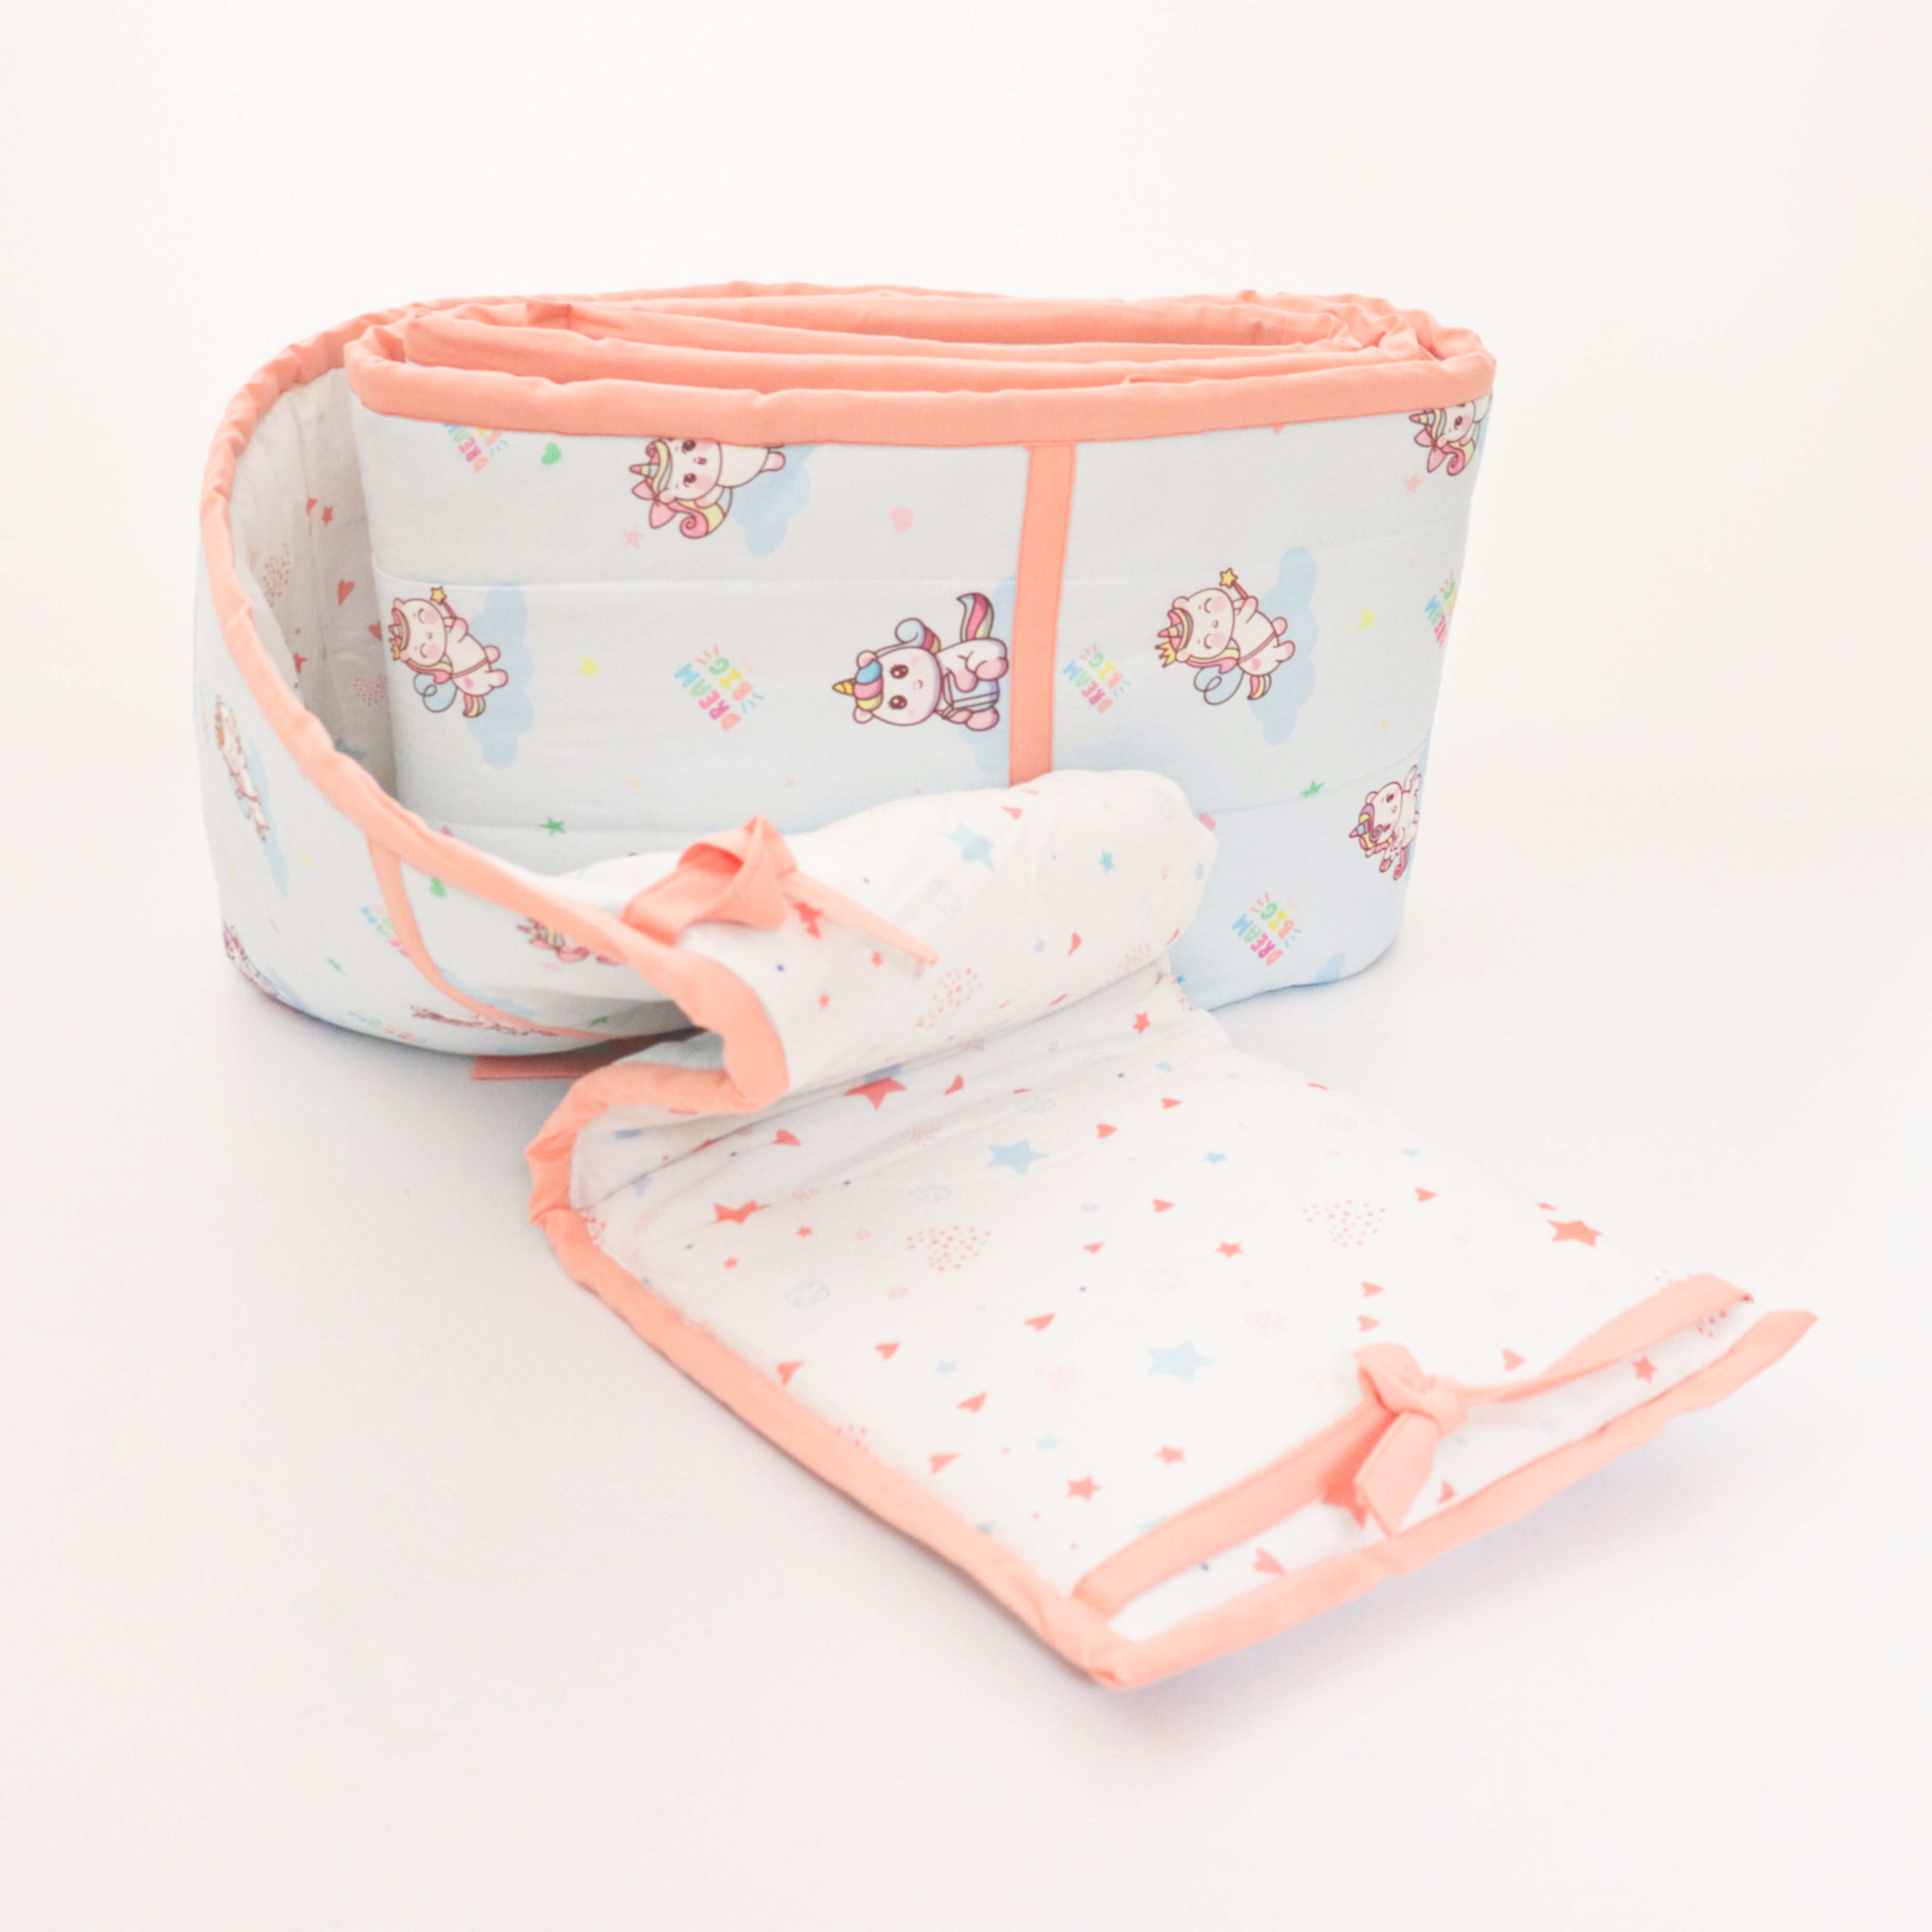 Unicorn Dreams - Quilted Cot Bumper